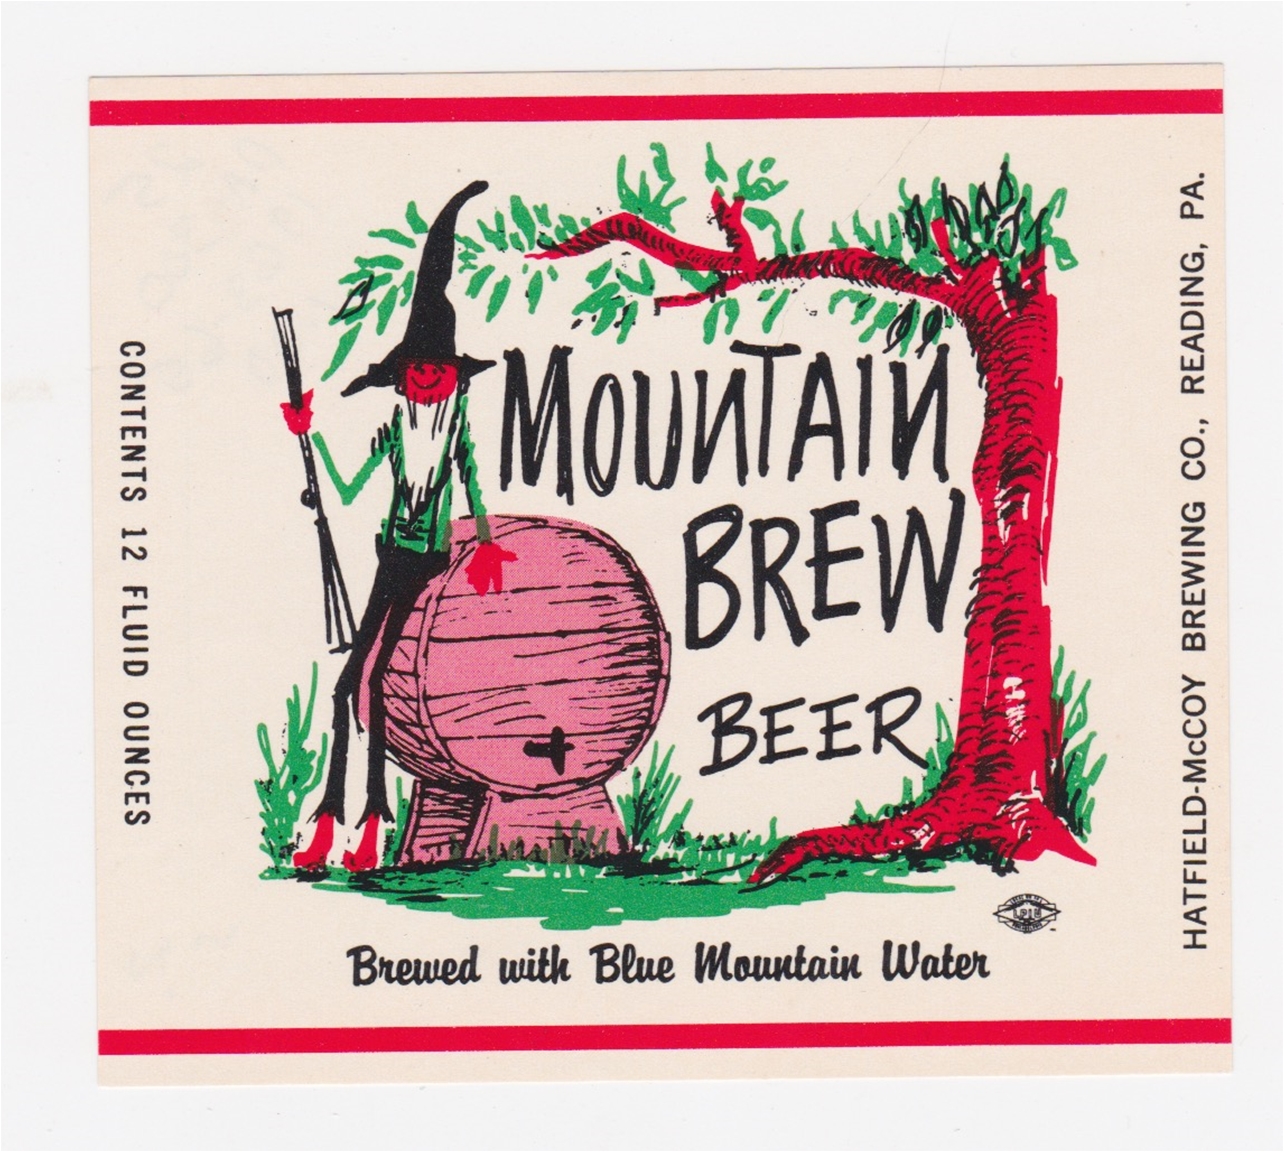 Mountain Brew Beer Label